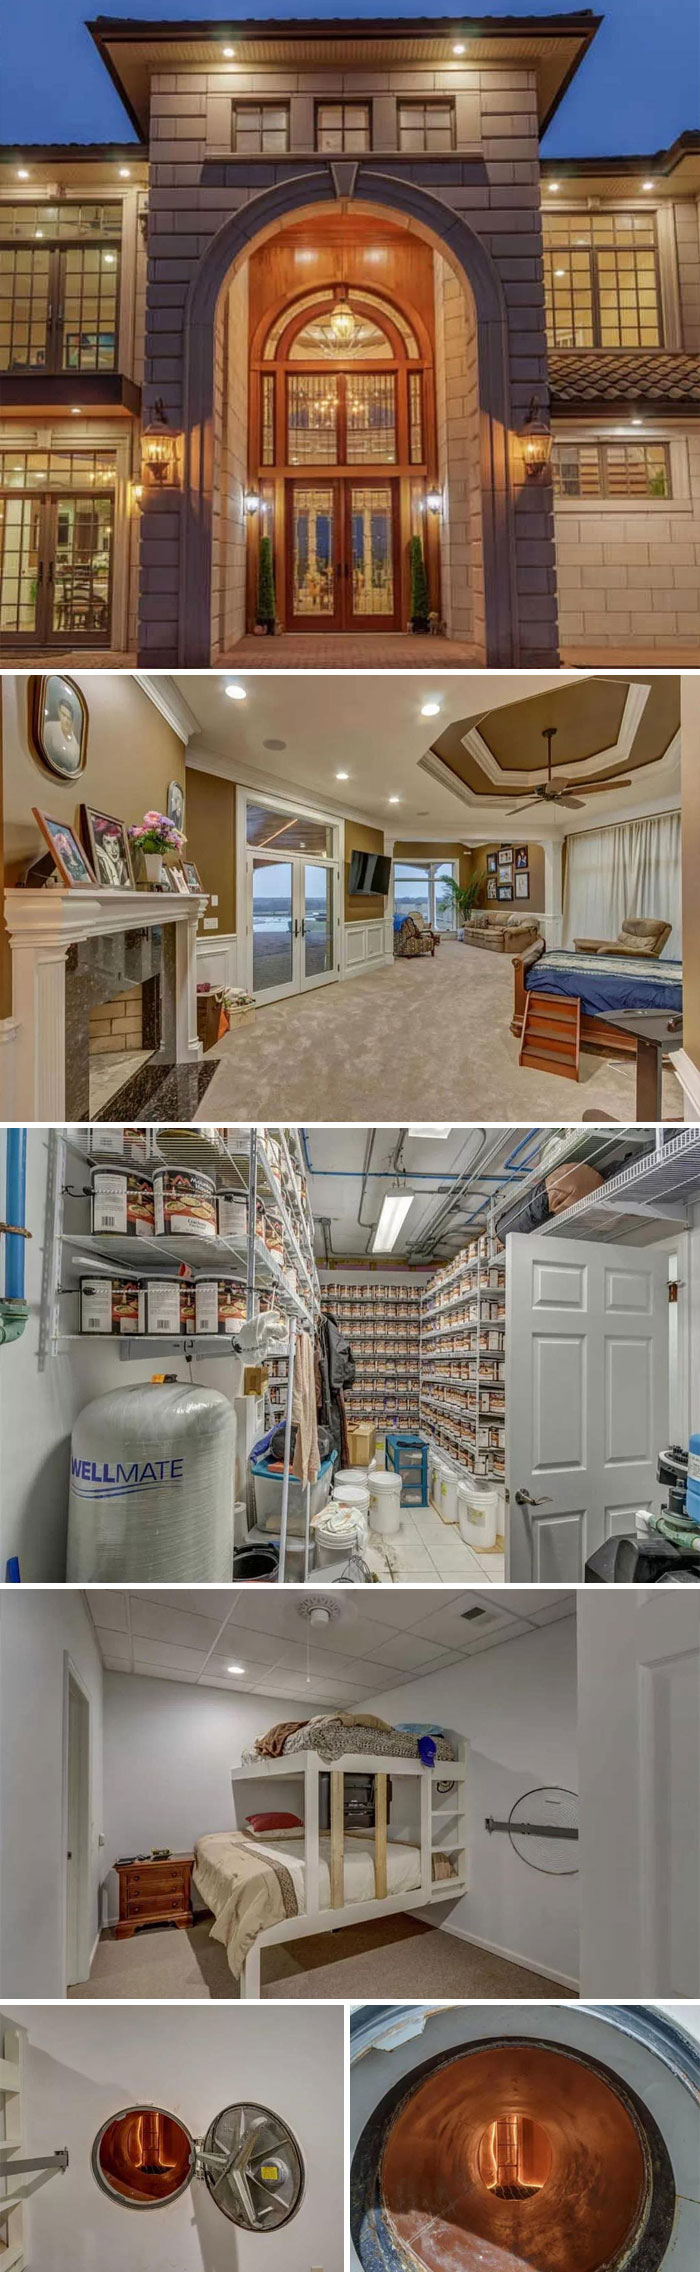 The Strawberry Bunker Home. 14,500